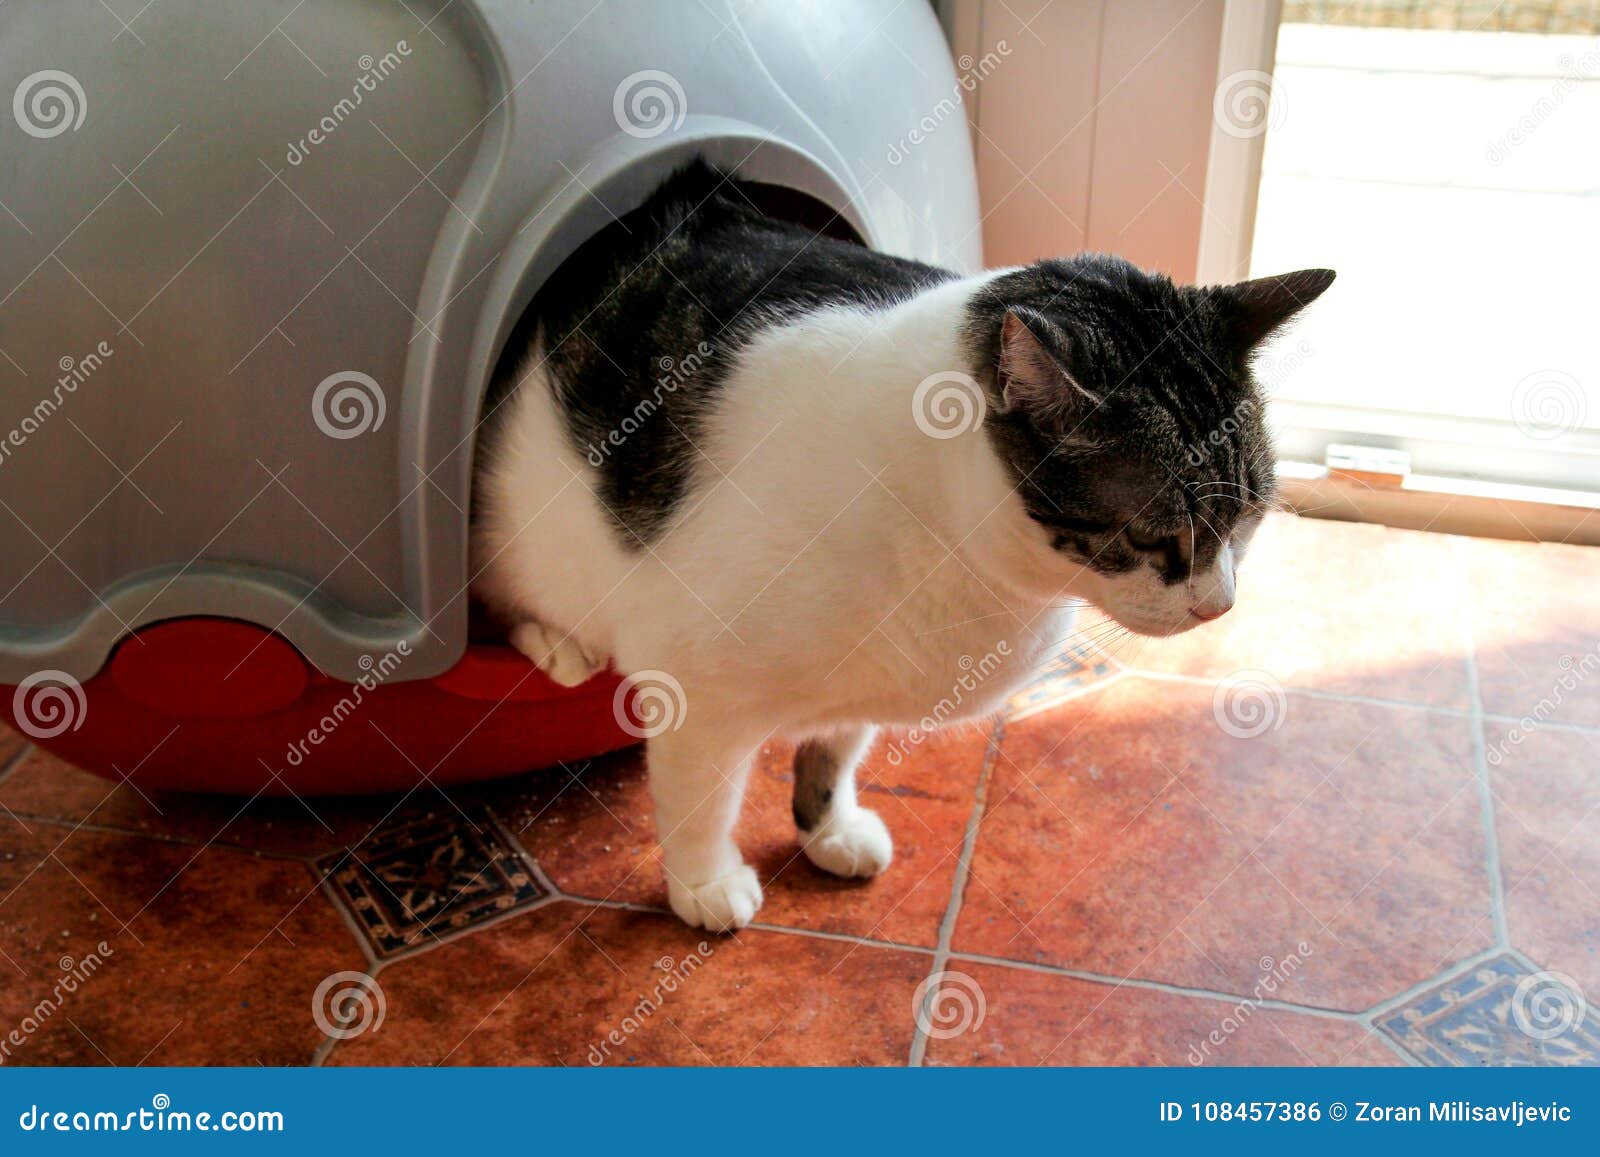 Cat Using Toilet Cat In Litter Box For Pooping Or Urinate